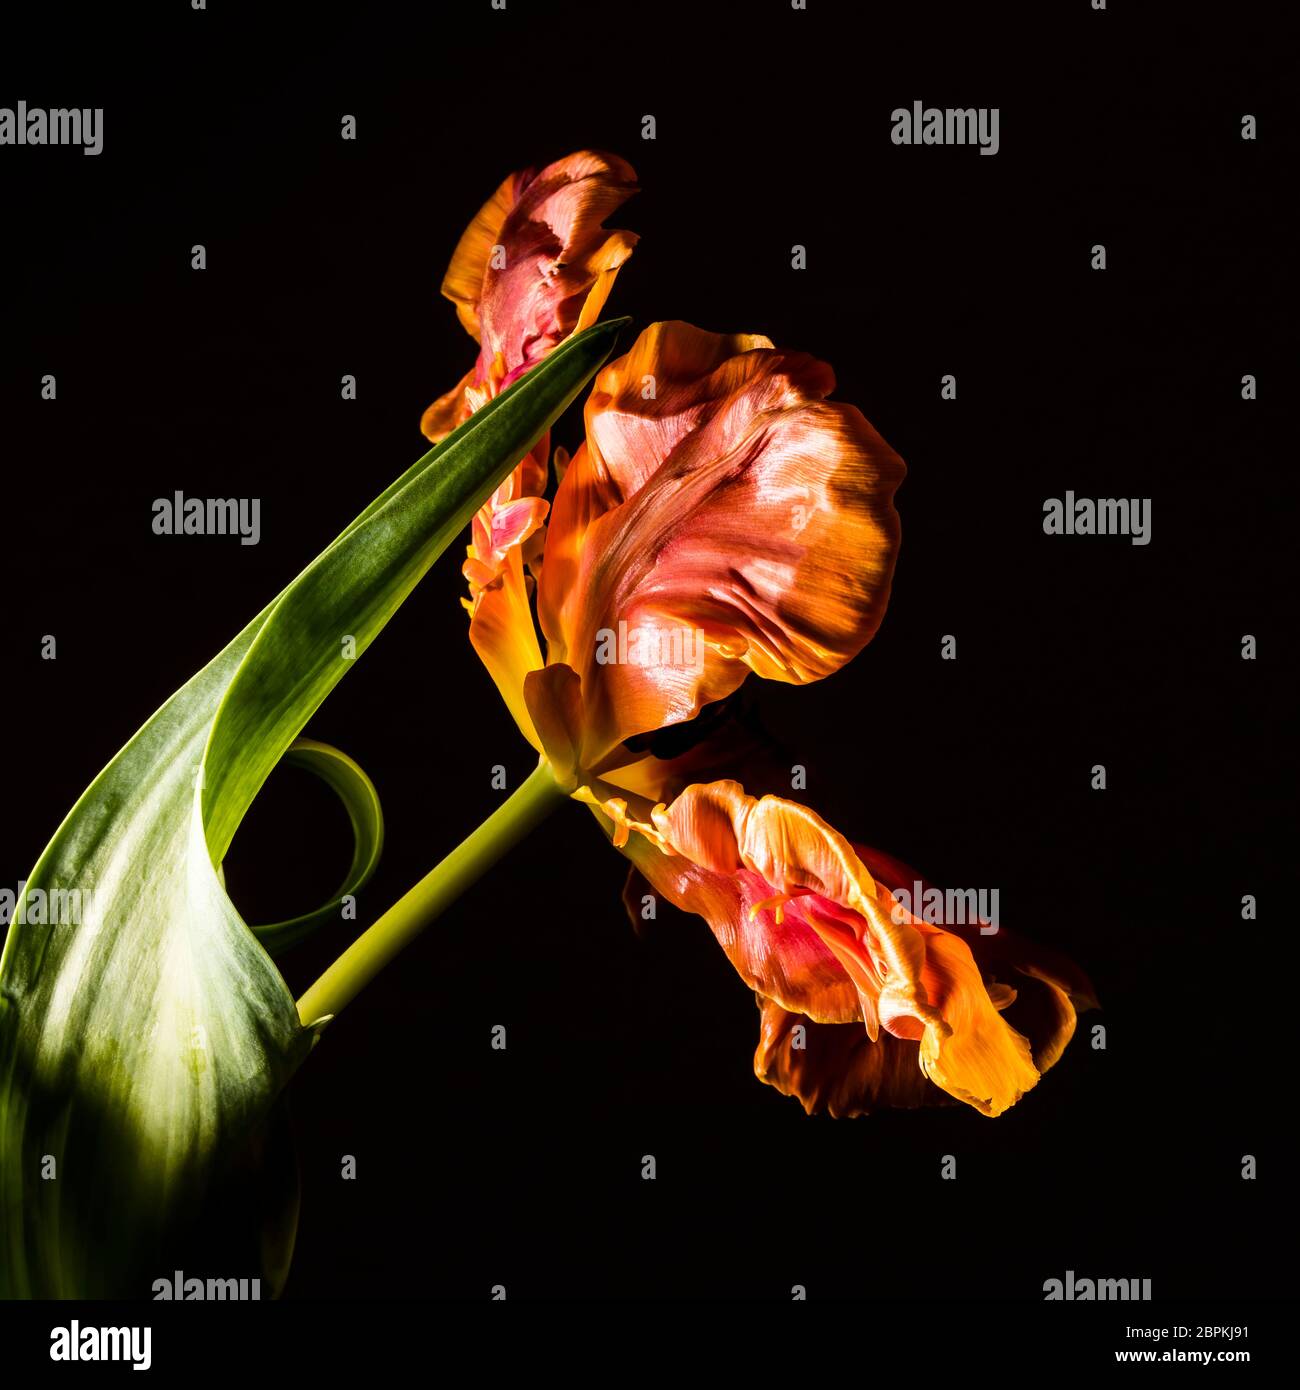 Looking into the blossom of a yellow-orange flamed parrot tulip Stock Photo